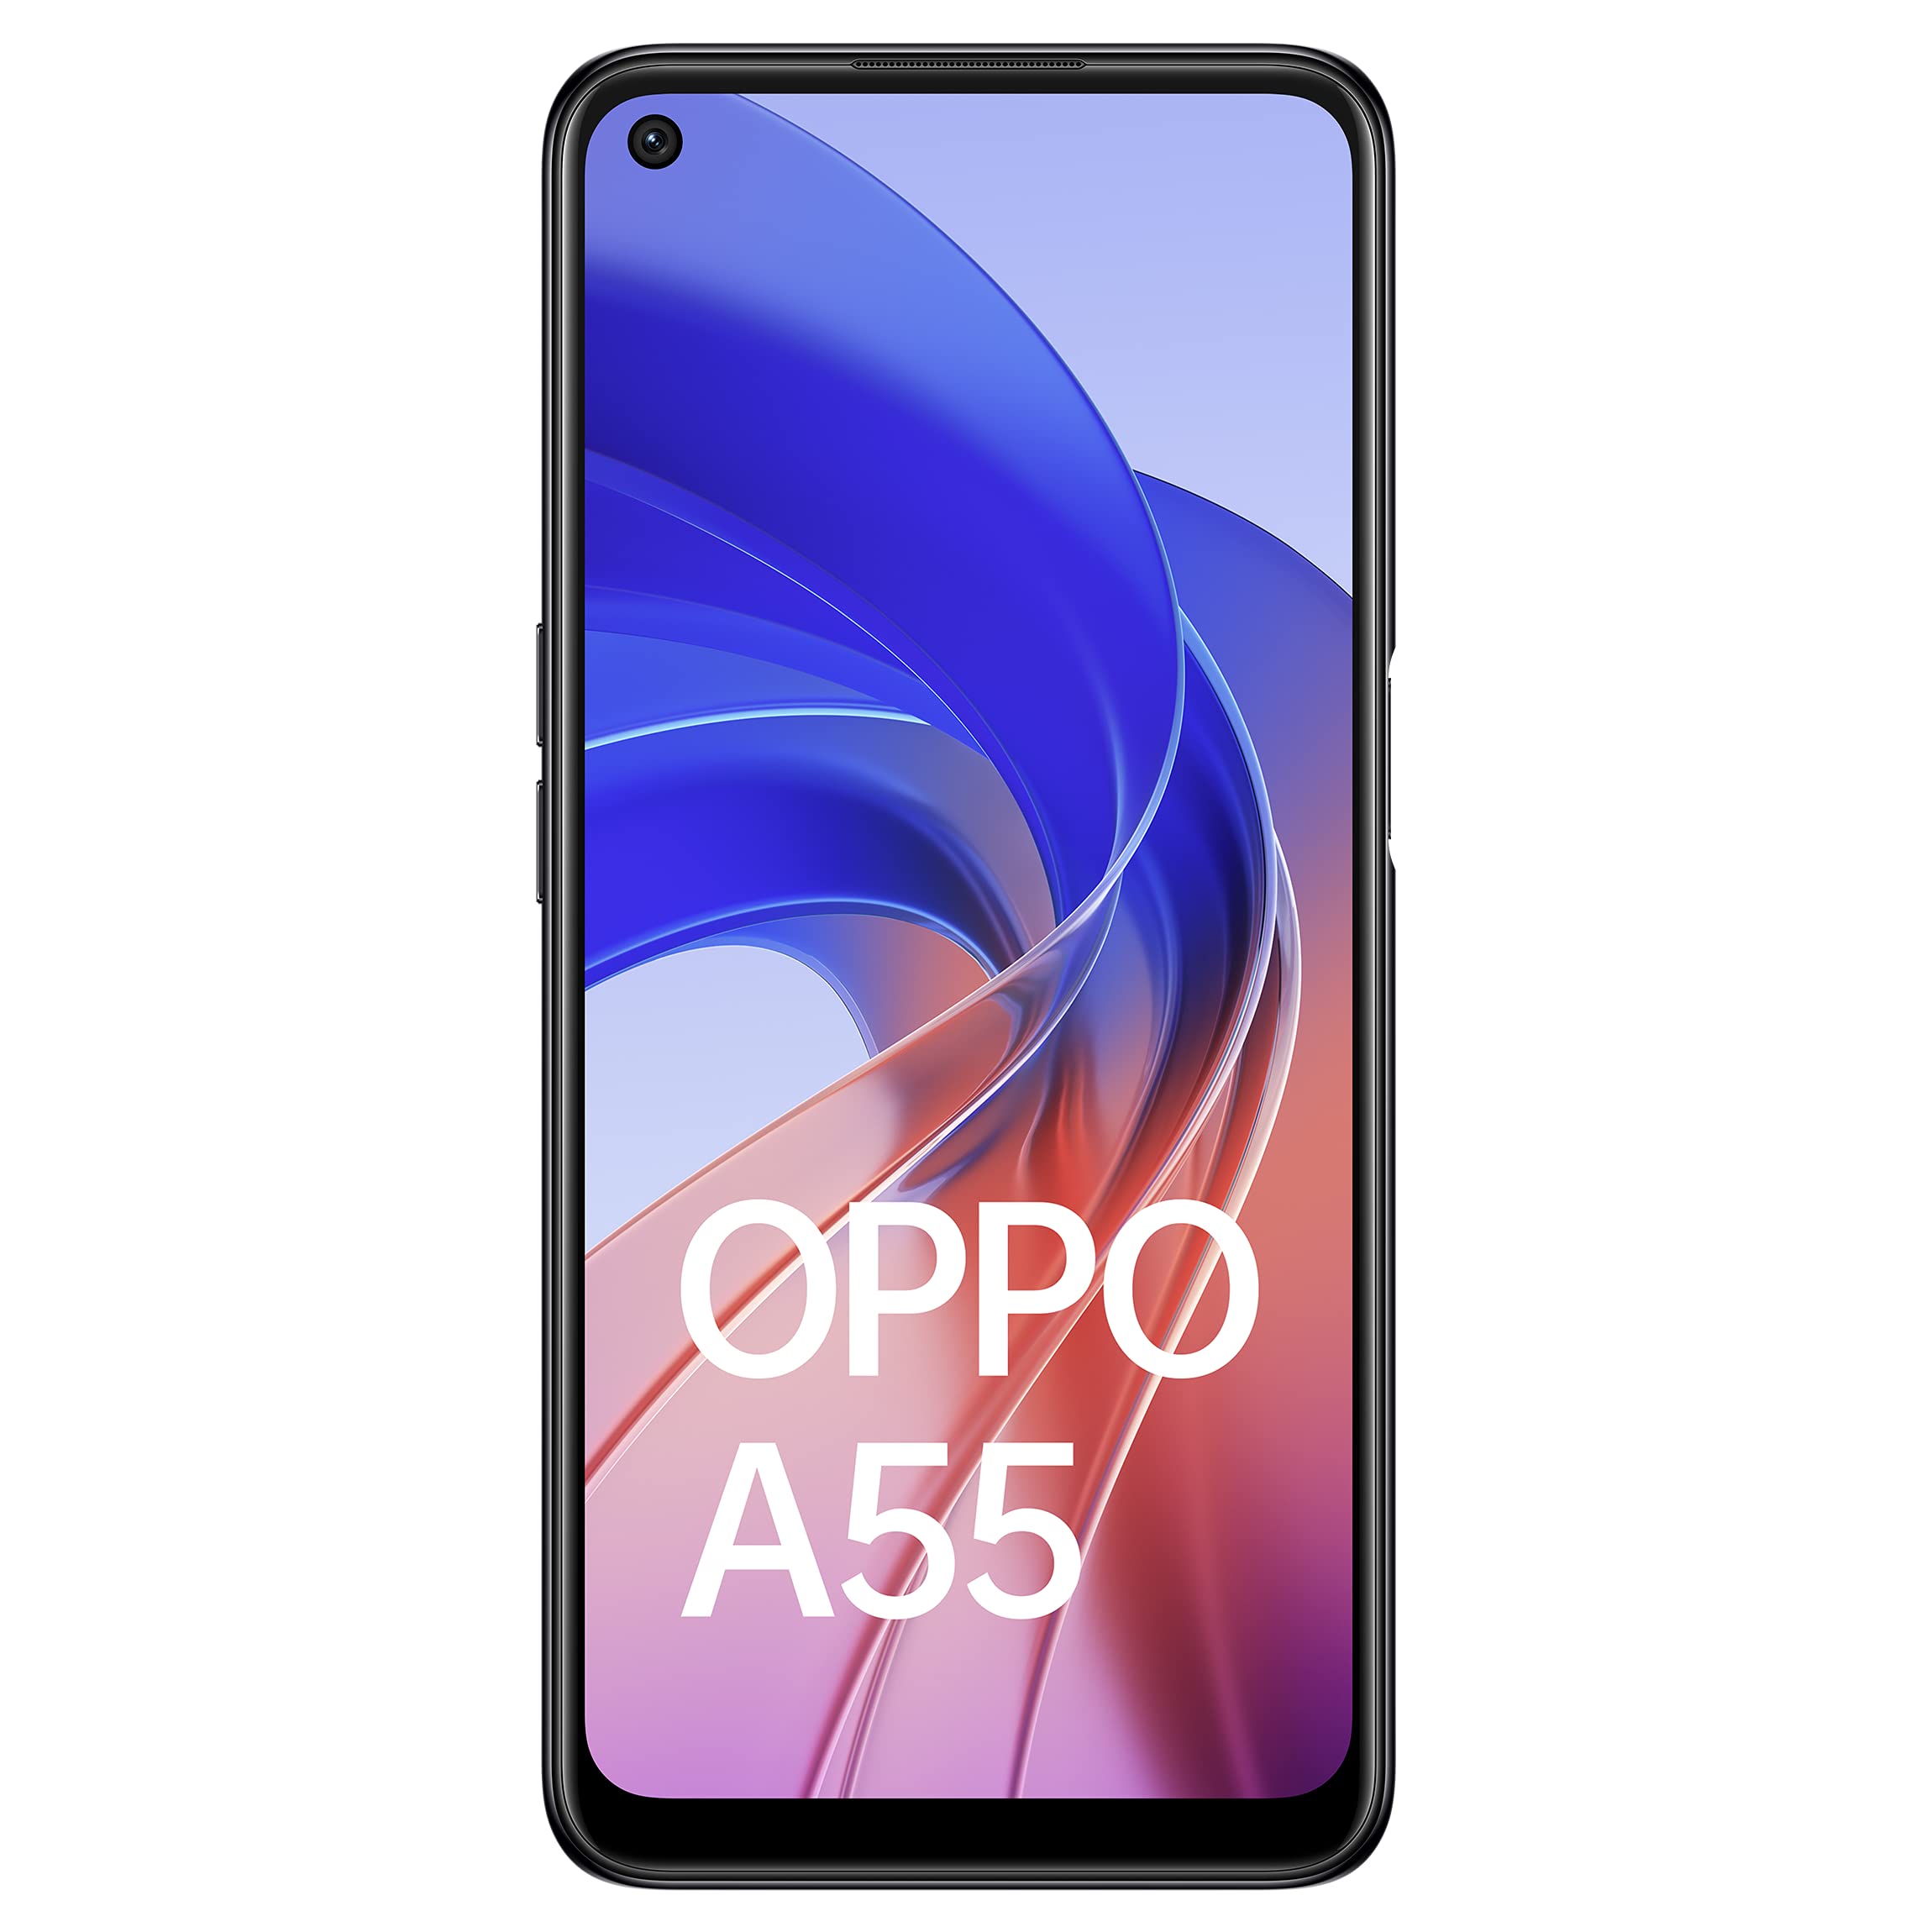 OPPO A55 (Starry Black, 4GB RAM, 64GB Storage) | Rs. 3000 HDFC Discount | Get Complimentary 3 Months Prime Membership